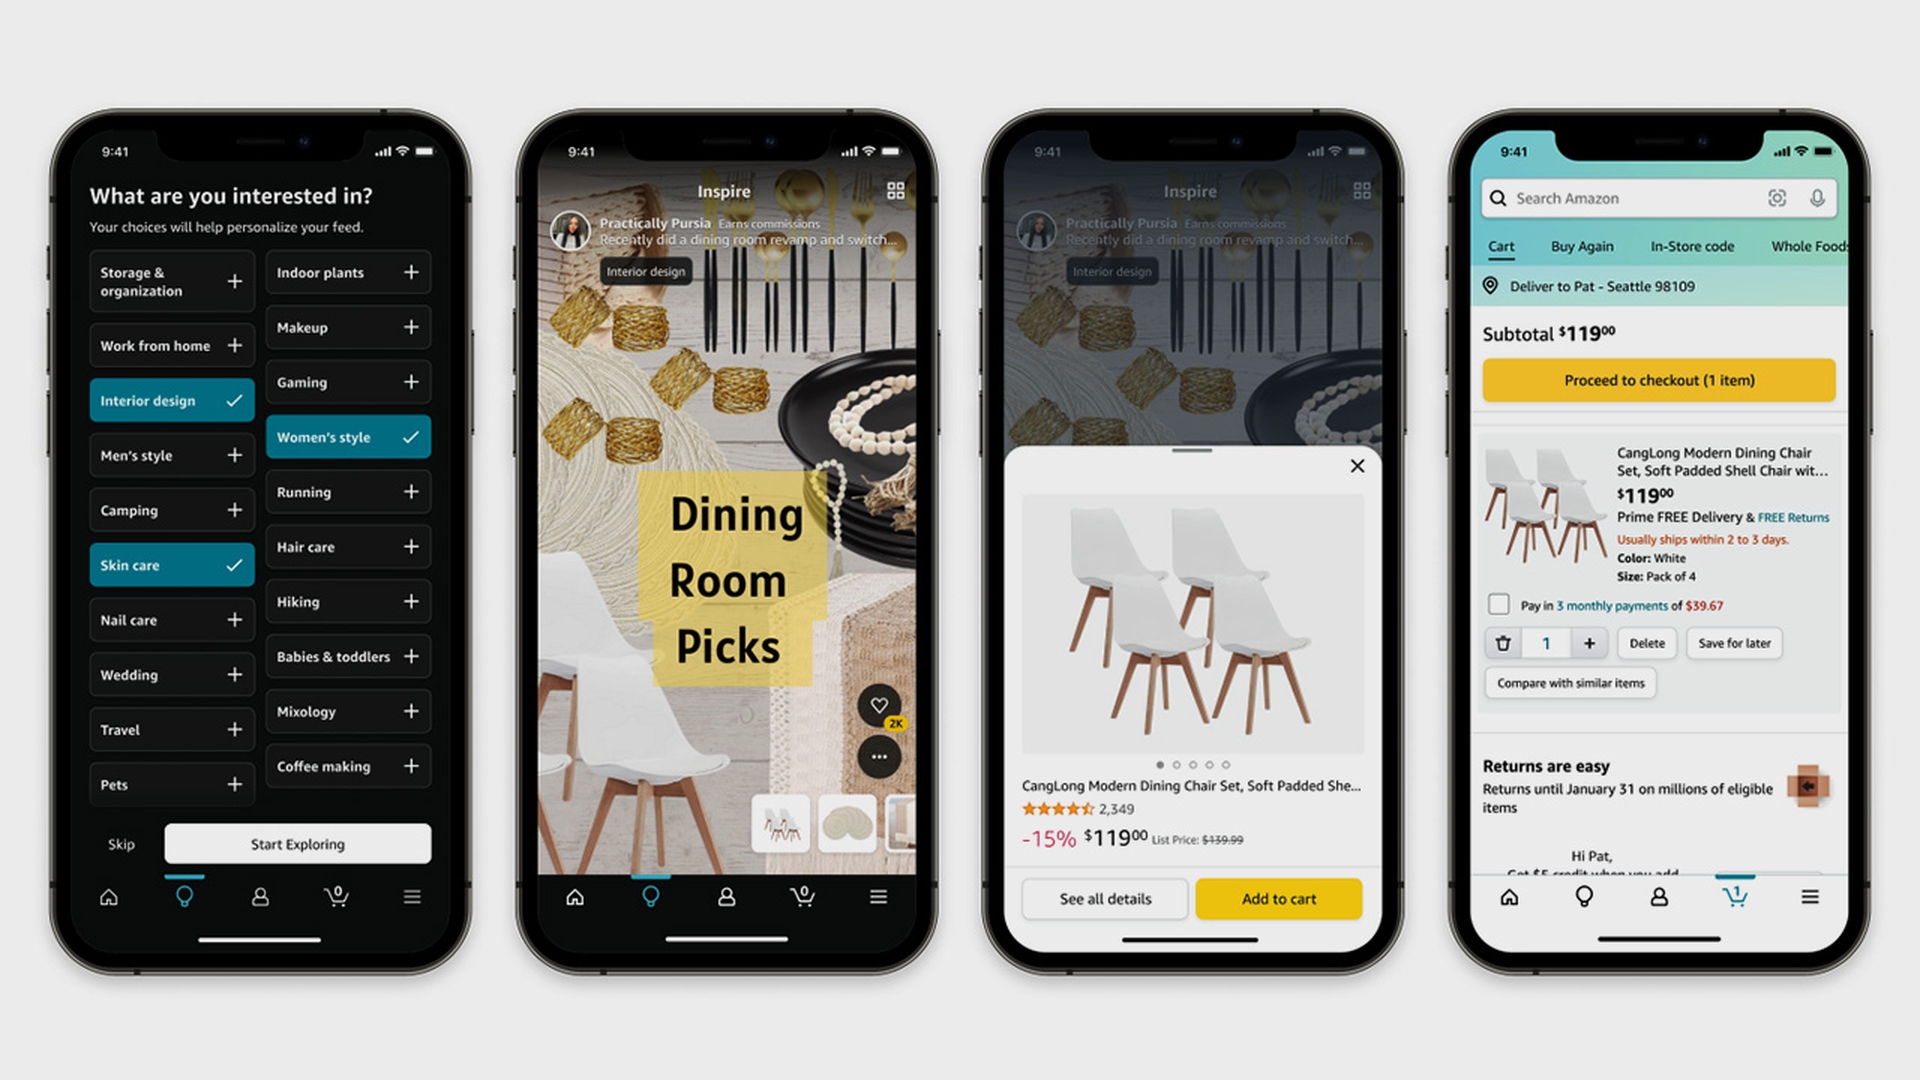 A TikTok-like shopping experience is coming to the Amazon app via the Amazon Inspire feature. The new short-form video and photo feed that enables users to...